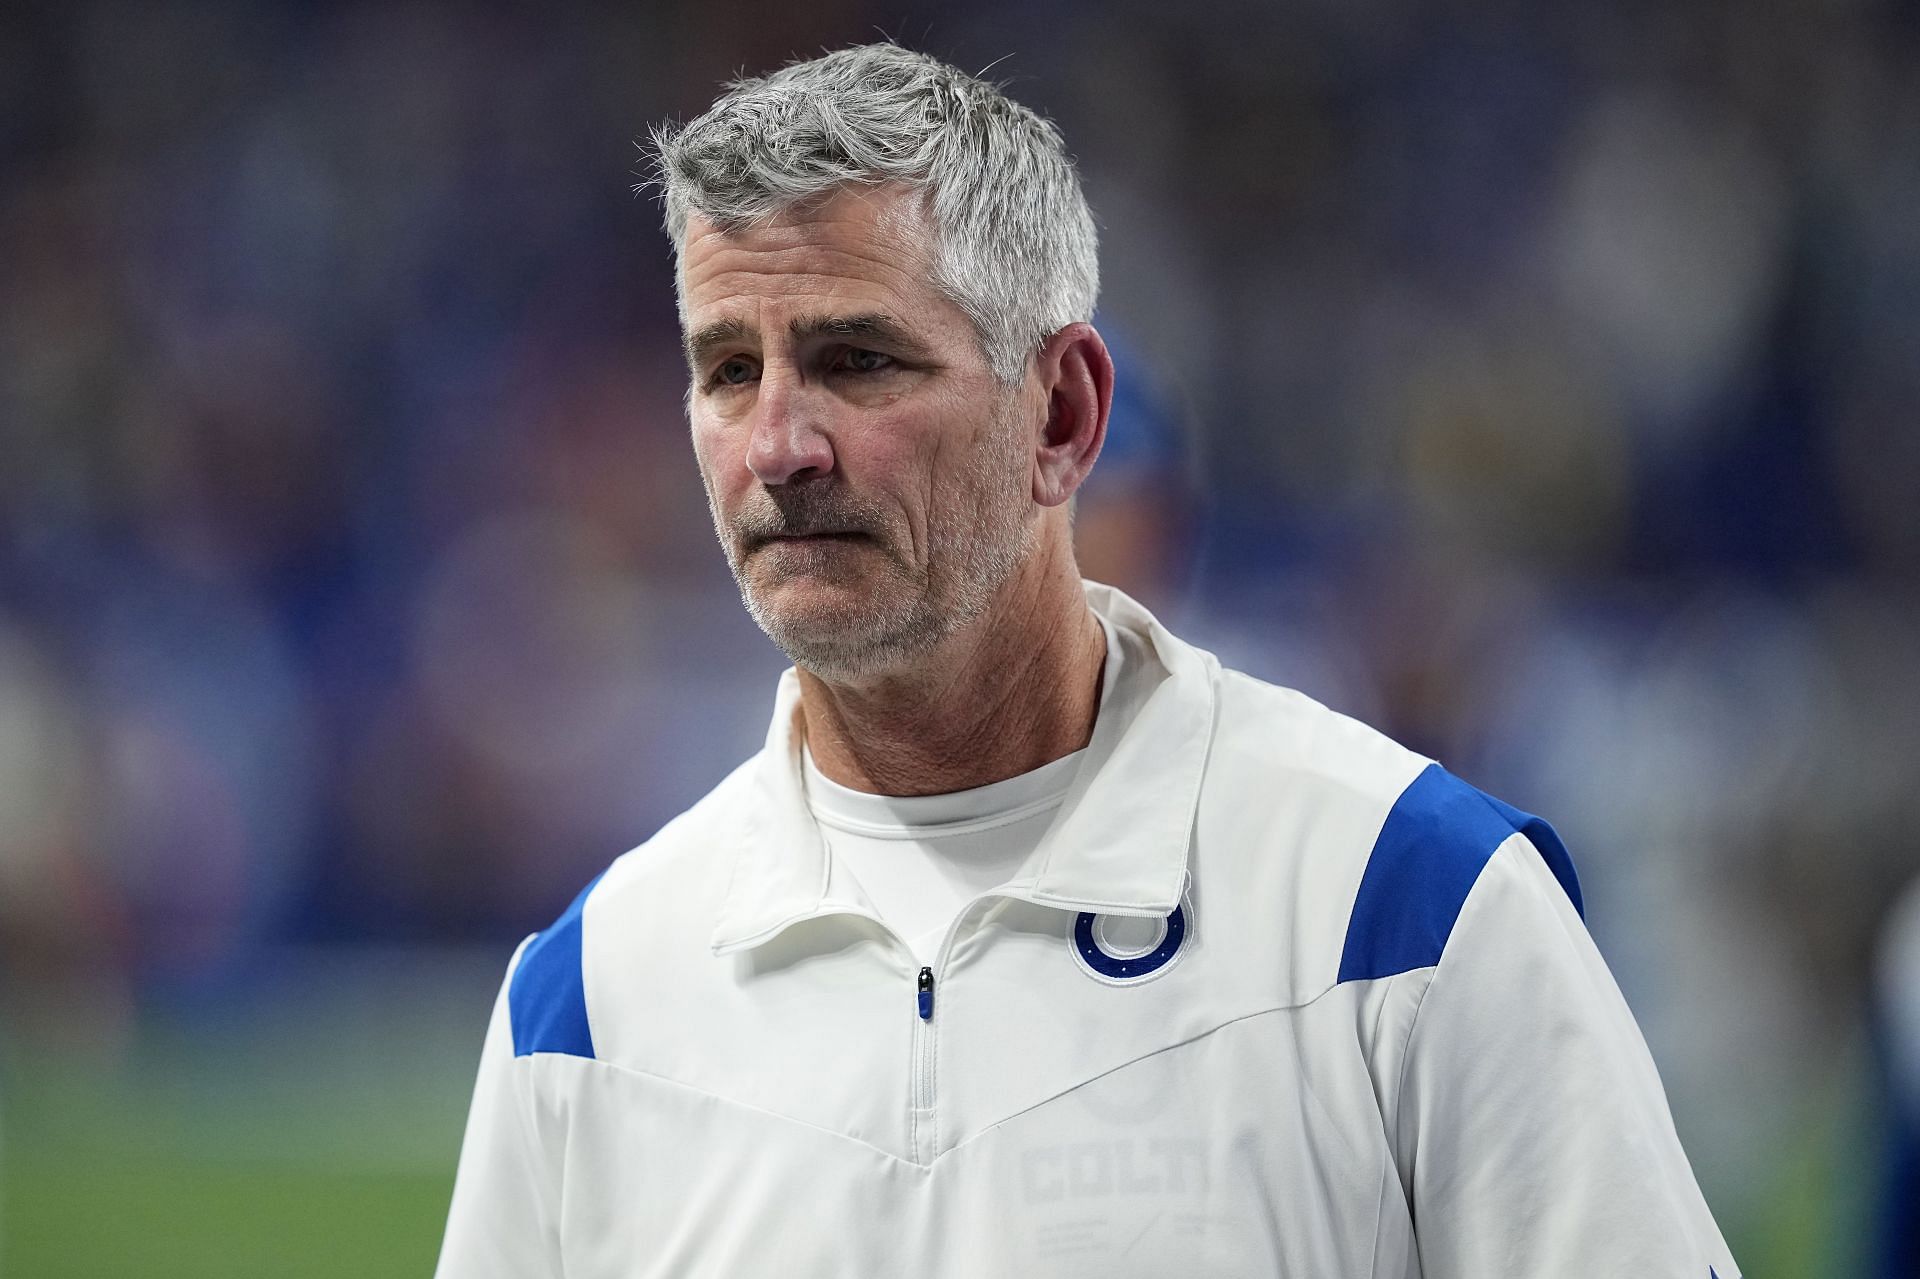 Former Indianapolis Colts coach Frank Reich